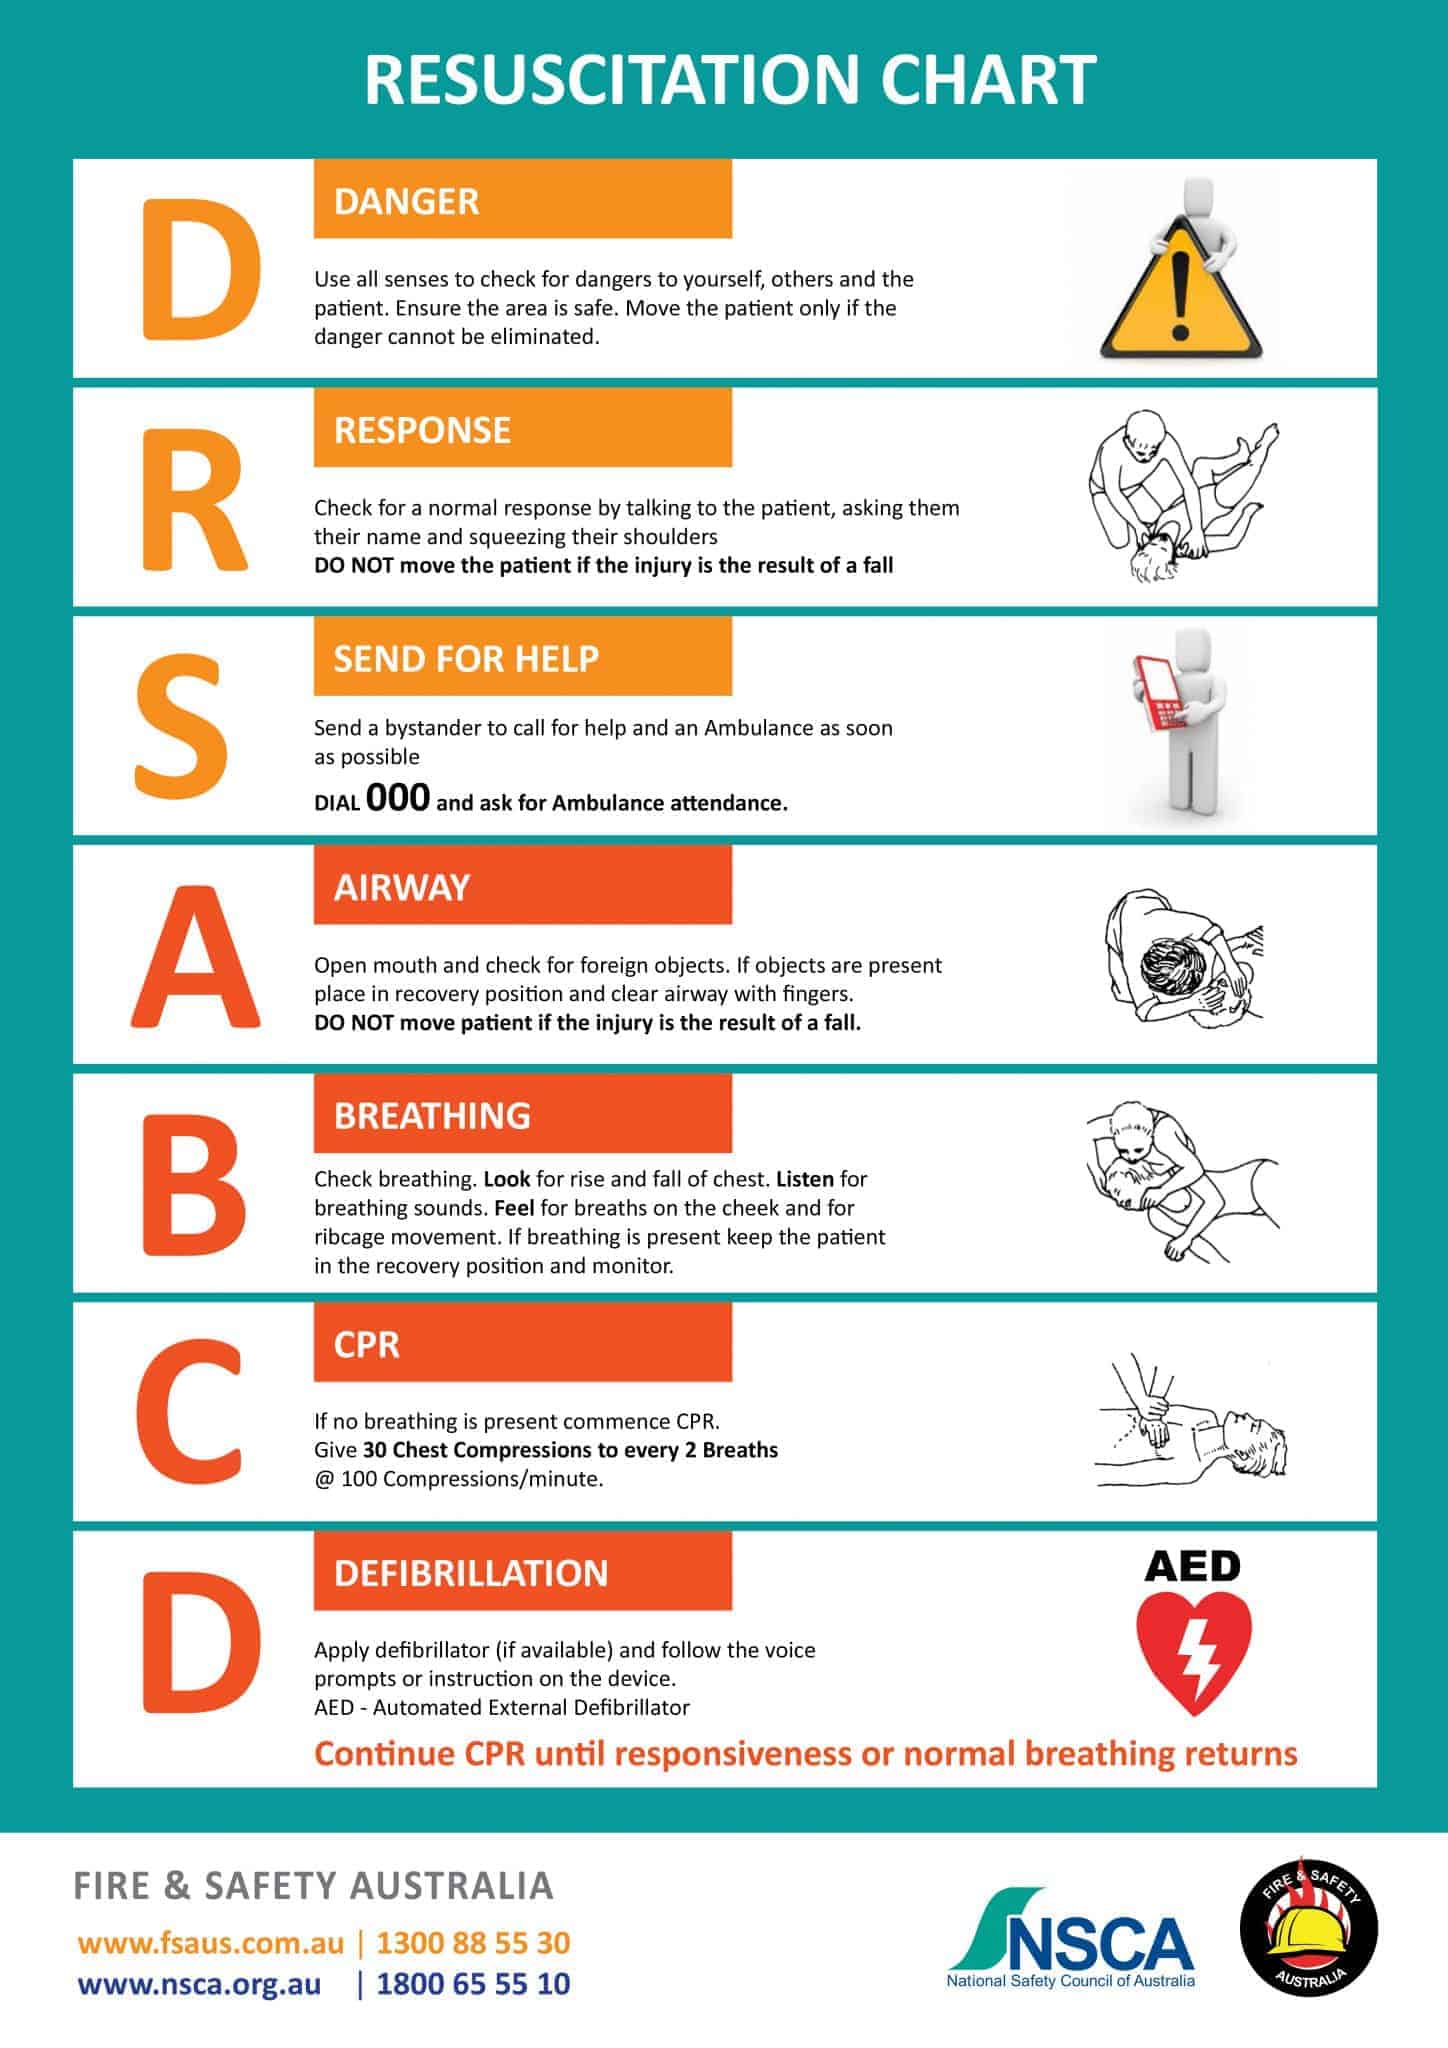 our-new-cpr-poster-designed-to-be-simple-and-easy-to-understand-in